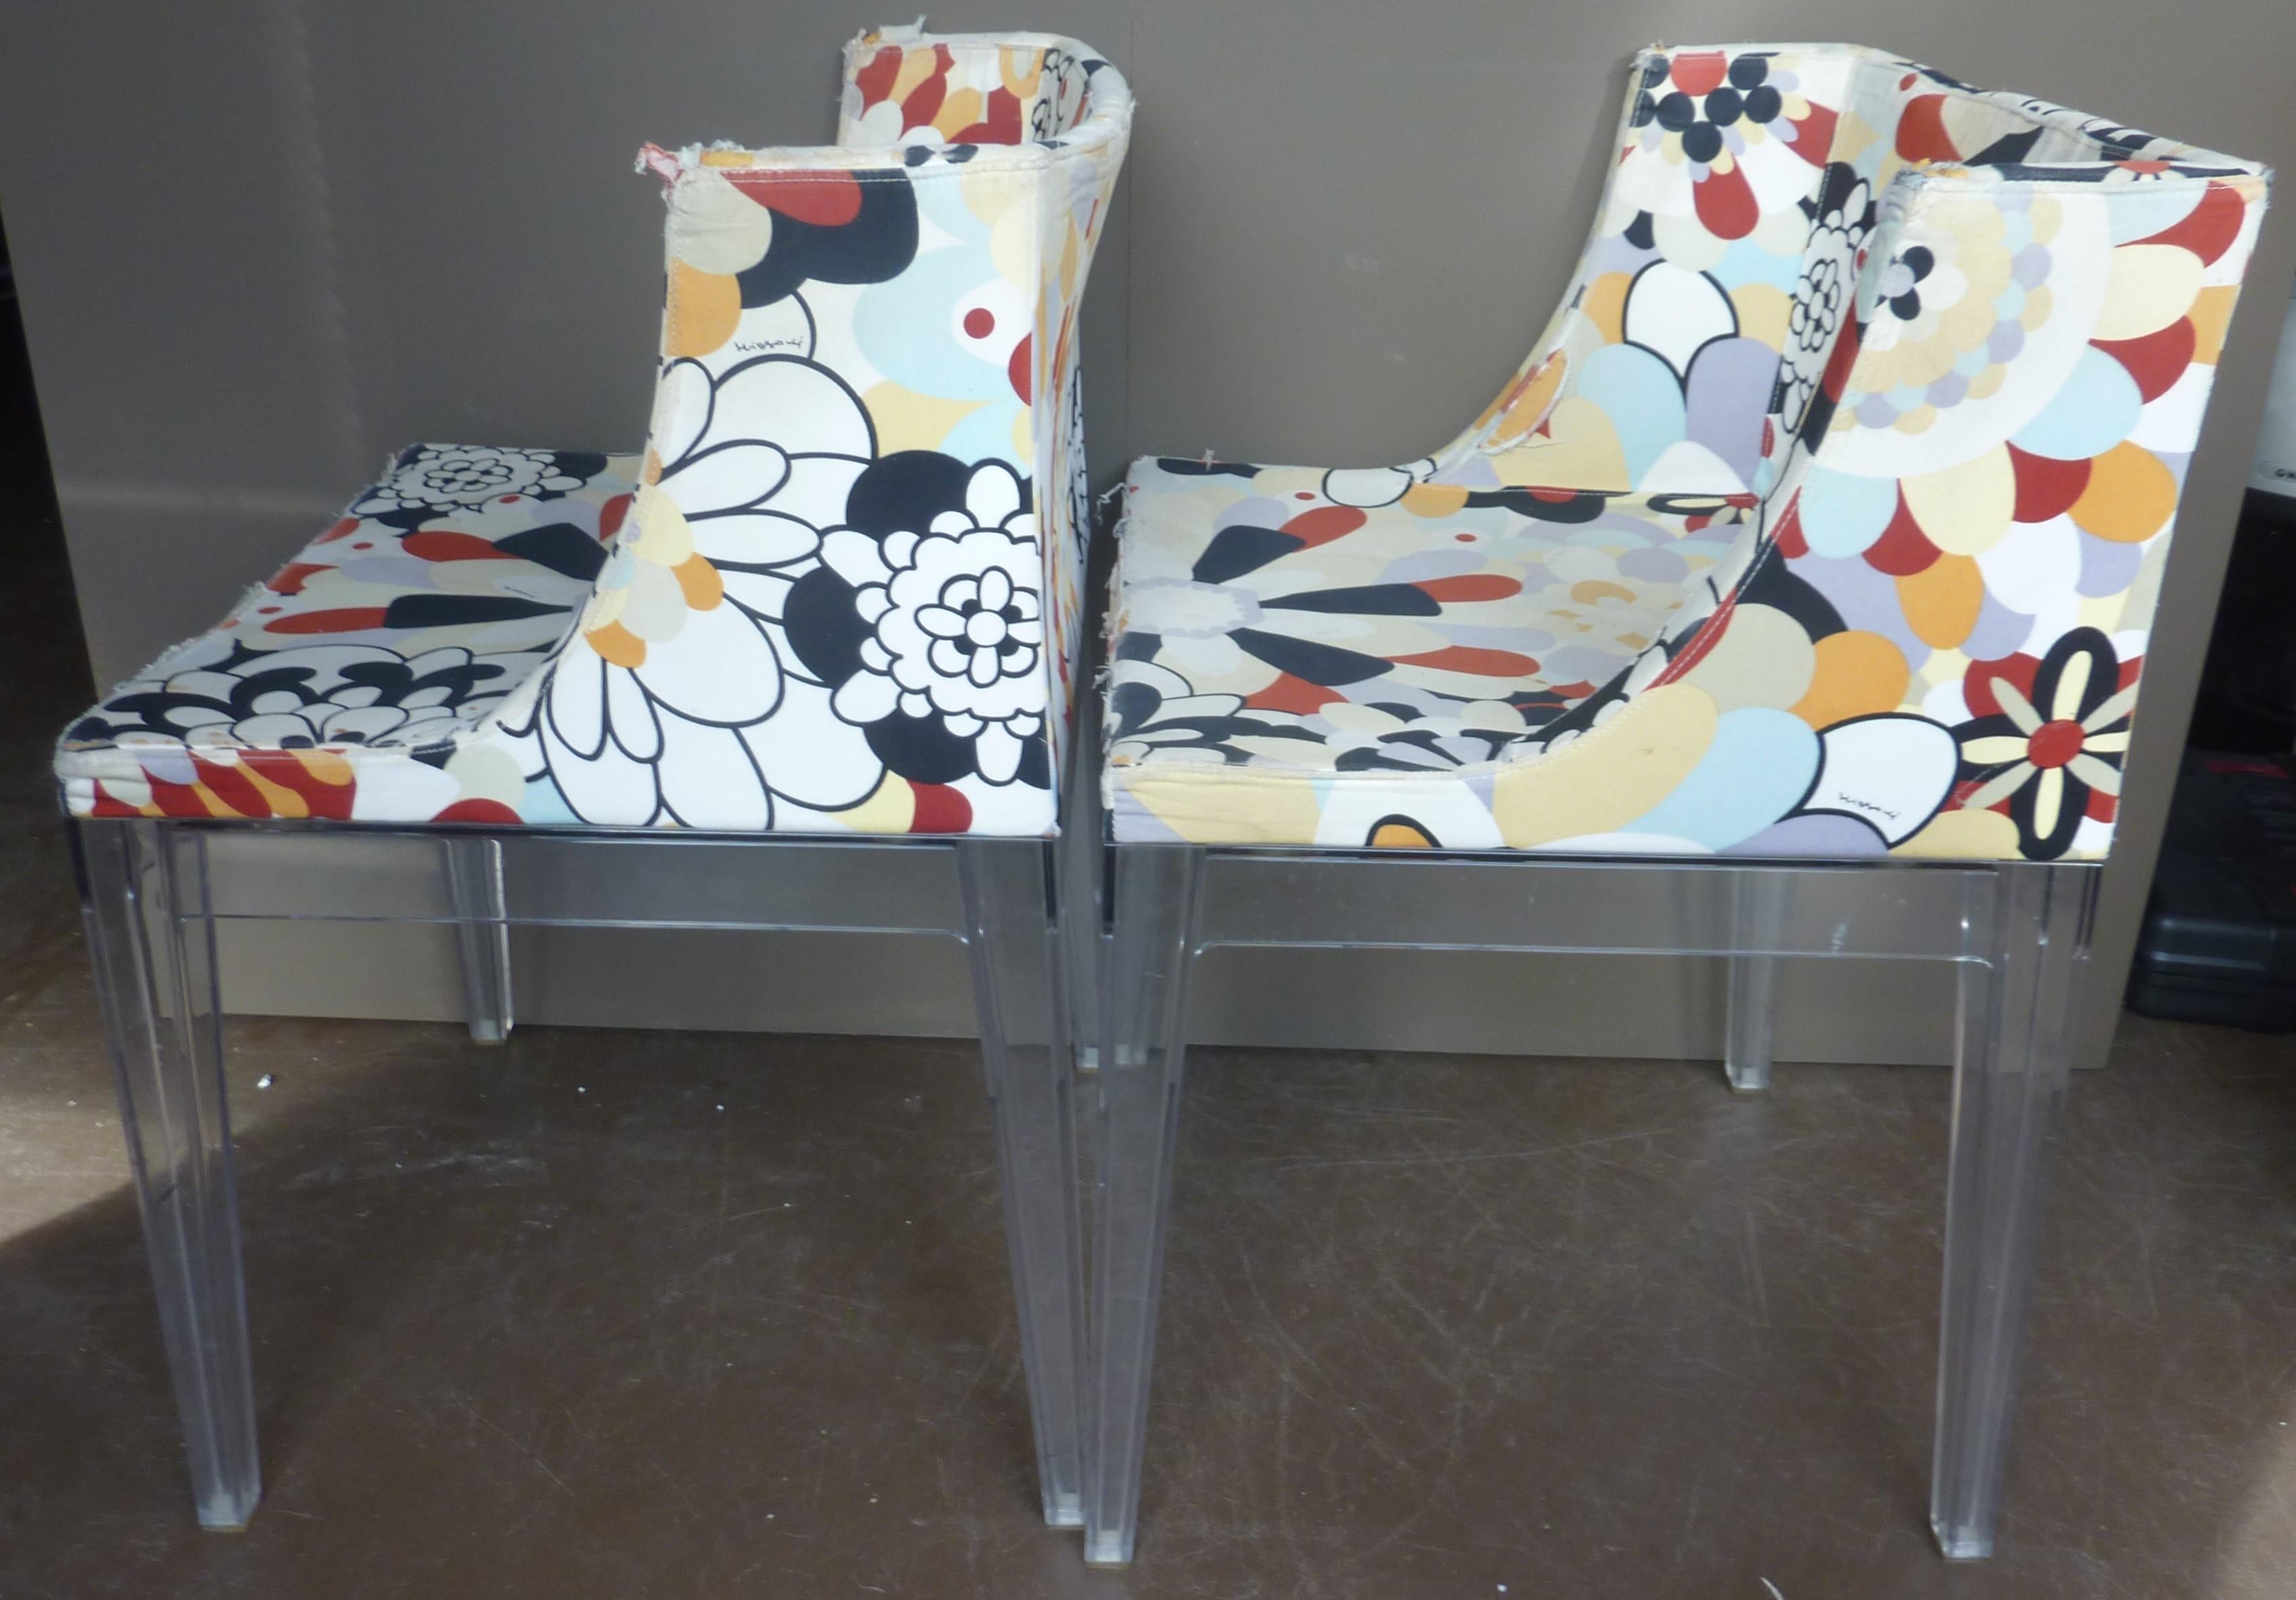 Kartell Mademoissele ''à la mode'' Missioni Vevey cover chair by Philippe Starck
Both chairs are in their original Kartell form with their comfortable and flexible backrest.
They are both 30 years old and in their first fabric.
Both chairs need to